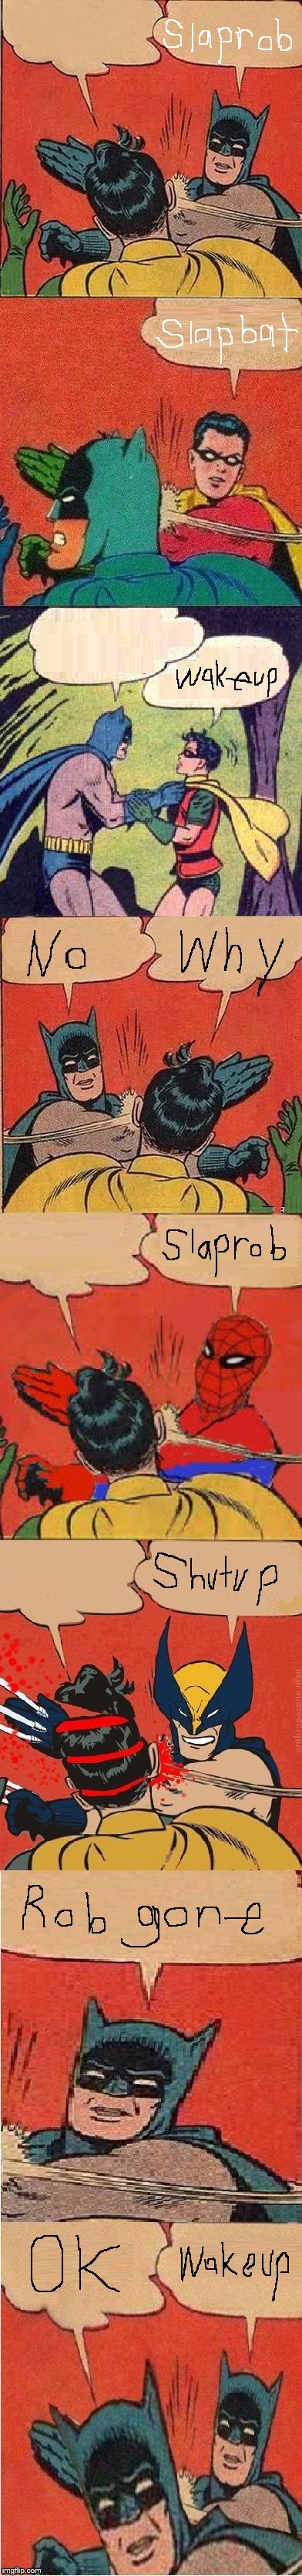 Ultimate slap fight | image tagged in ultimate slap fight | made w/ Imgflip meme maker